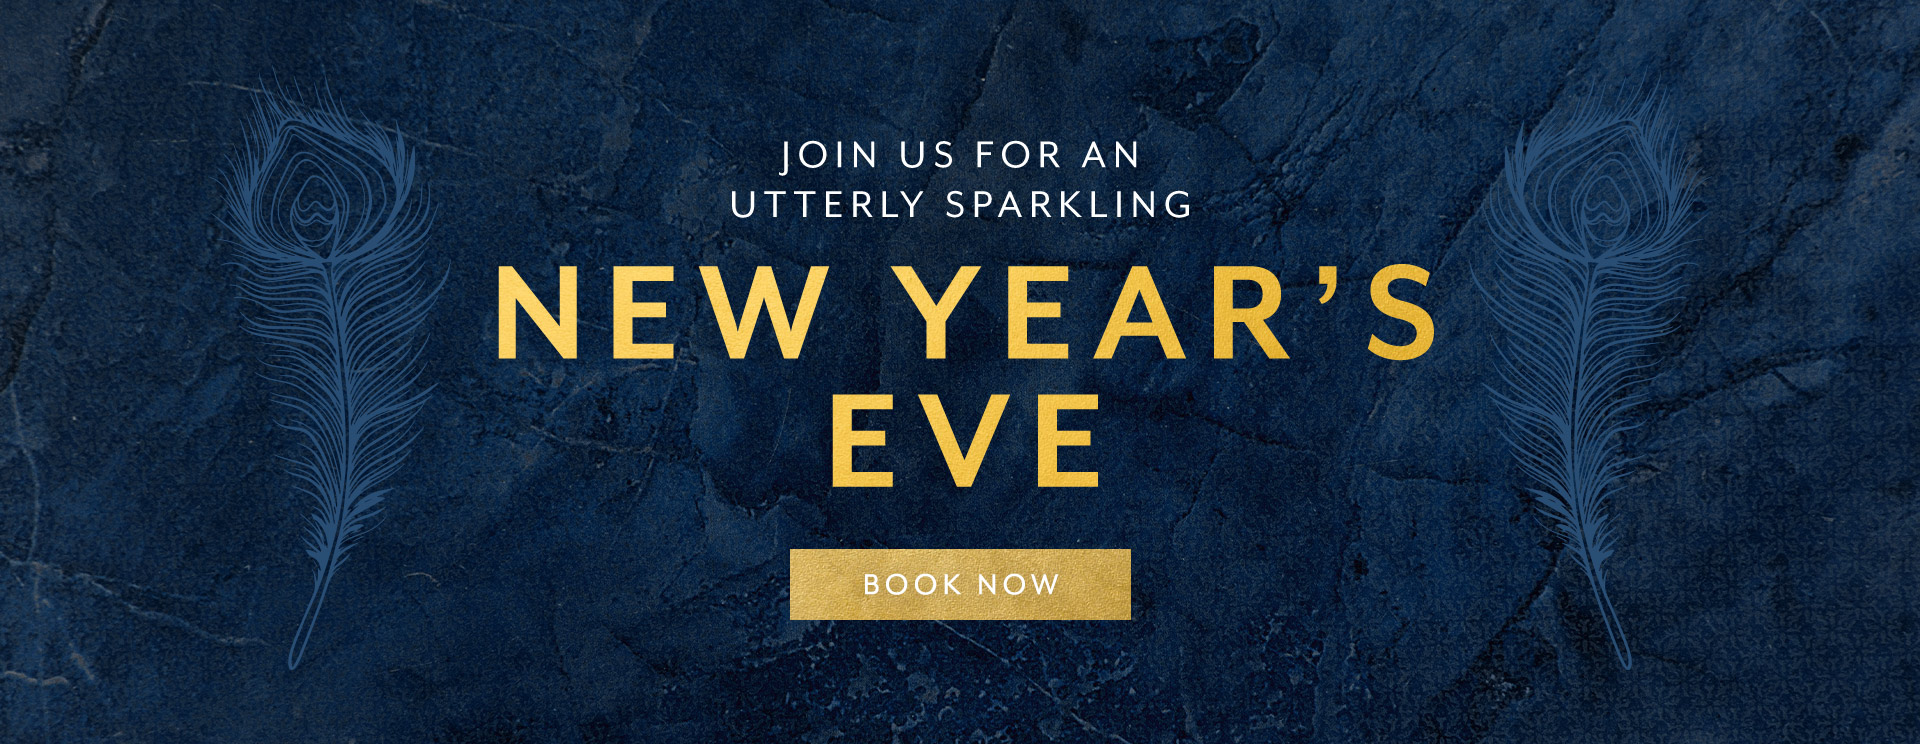 New Year's Eve at The Horseshoes